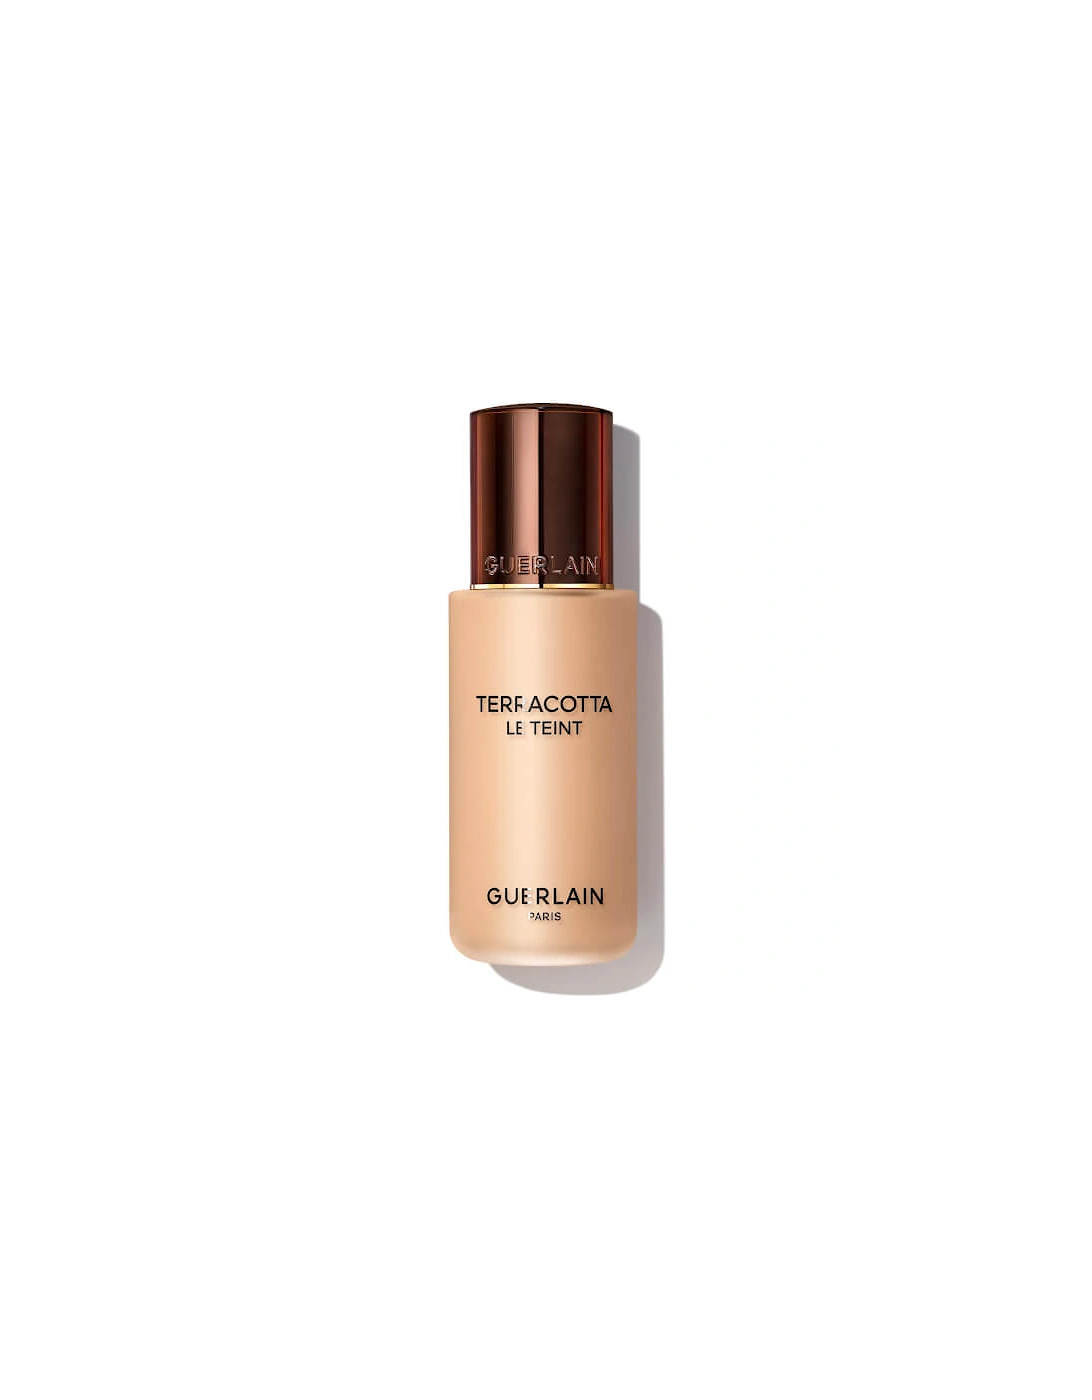 Terracotta Le Teint Healthy Glow Natural Perfection Foundation - 3W, 2 of 1